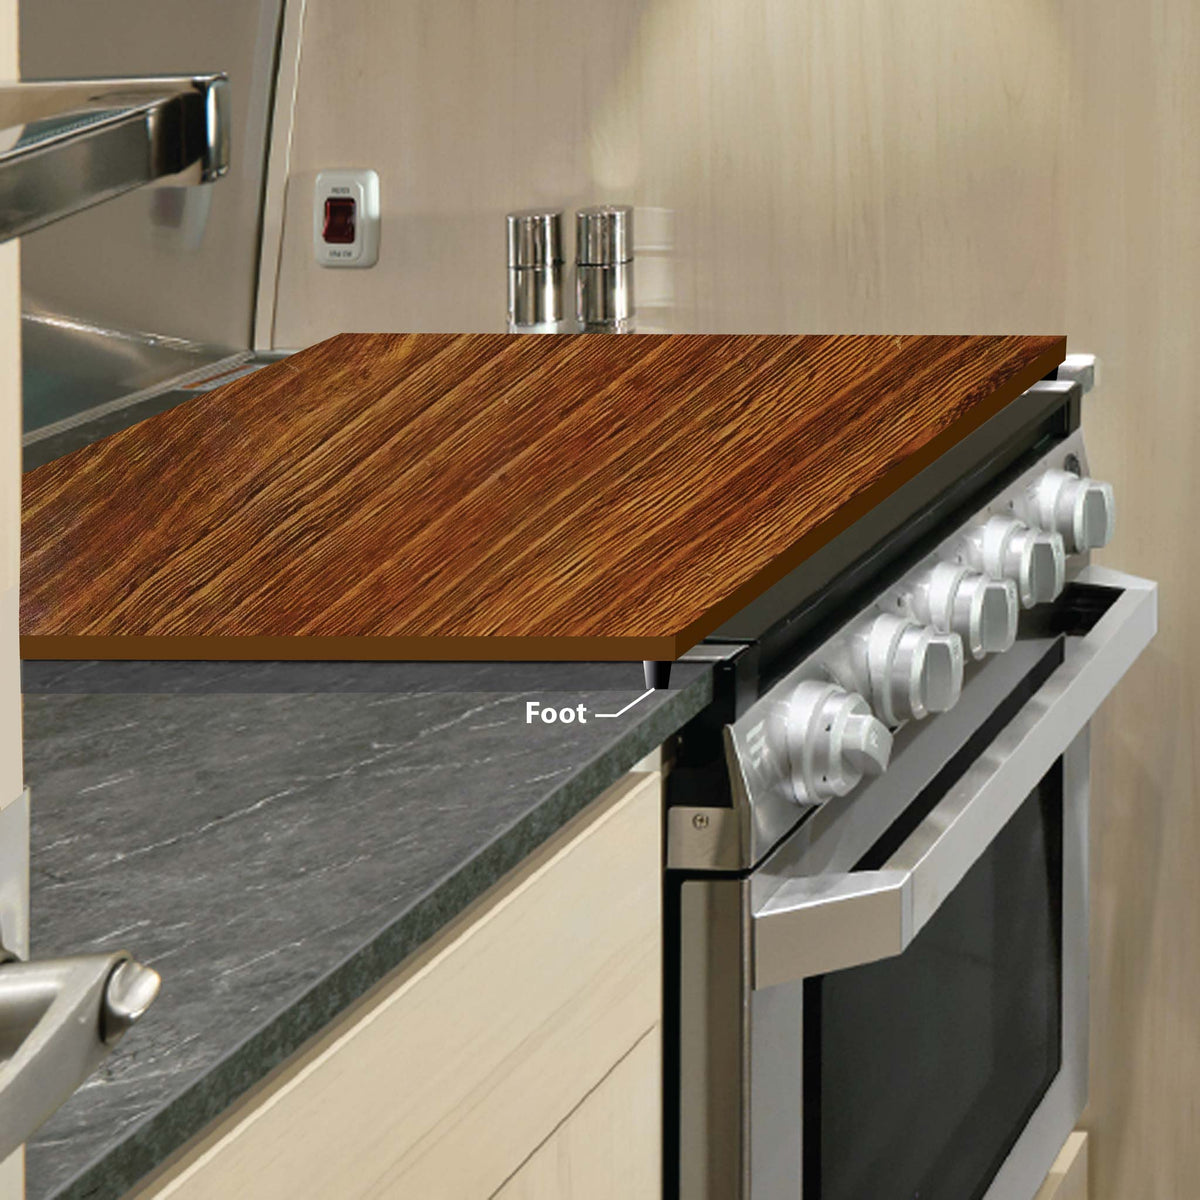 Stove top cover - noodle board - stove top protector (Dark walnut